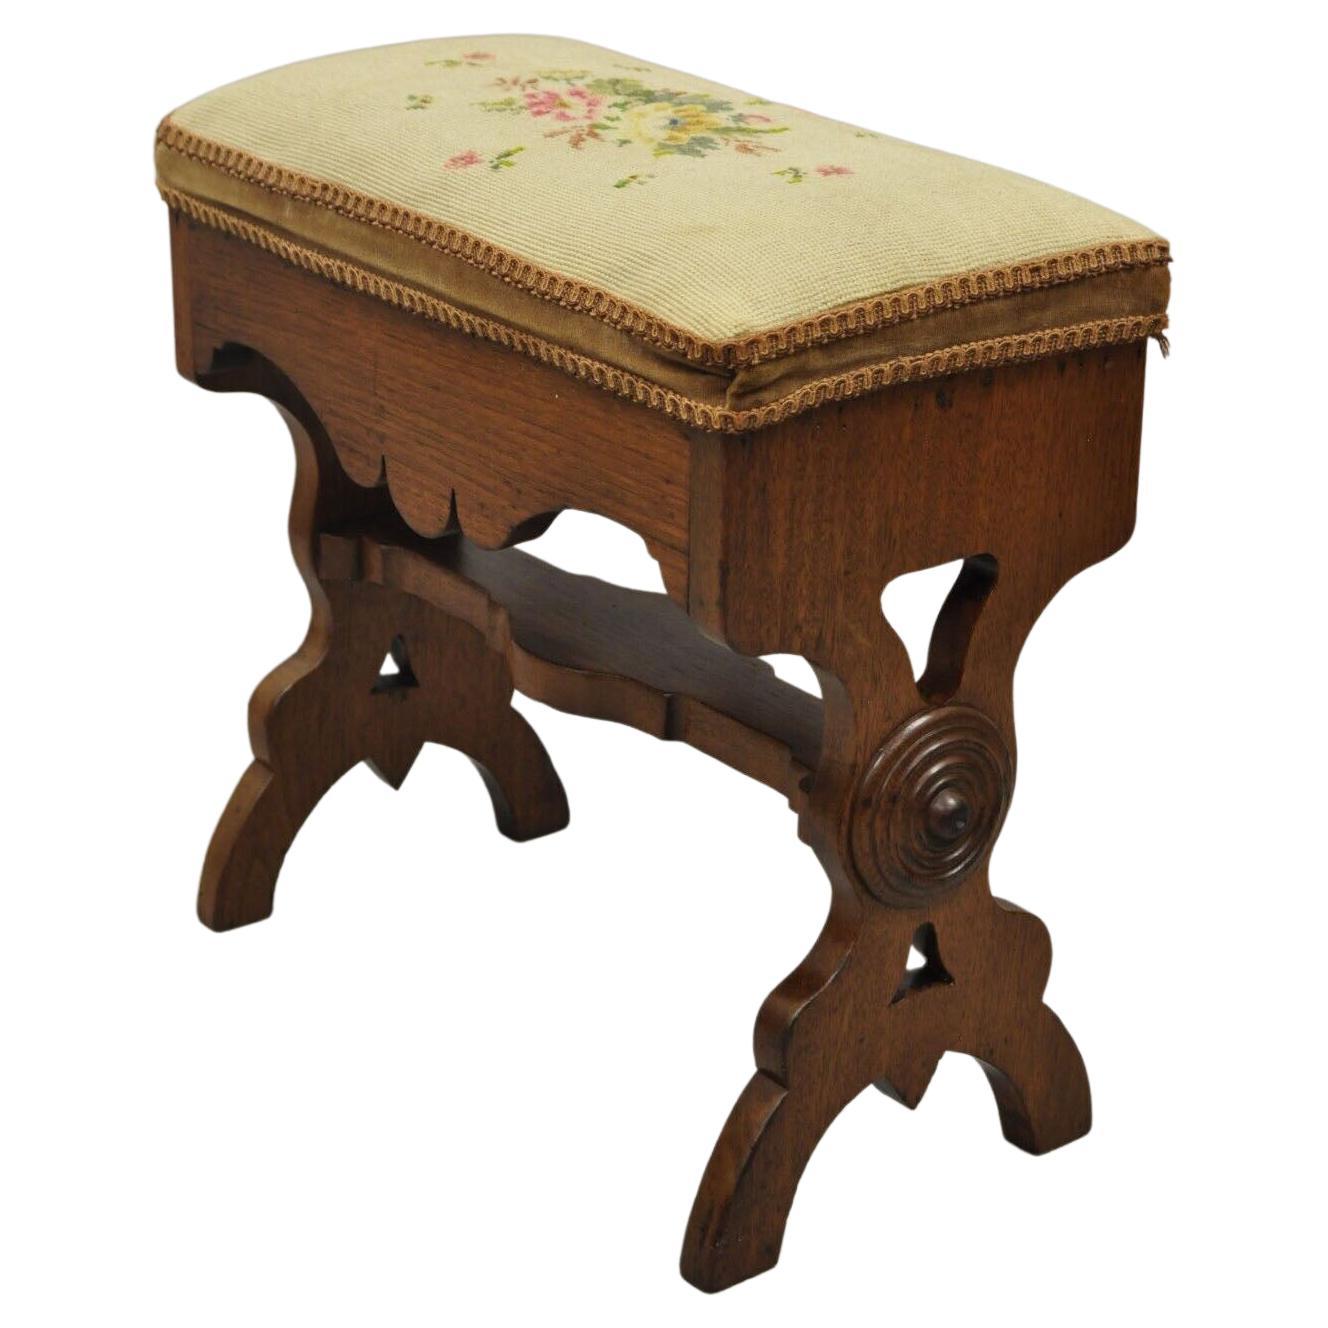 Antique Eastlake Victorian Carved Walnut Stool Bench with Needlepoint Seat For Sale